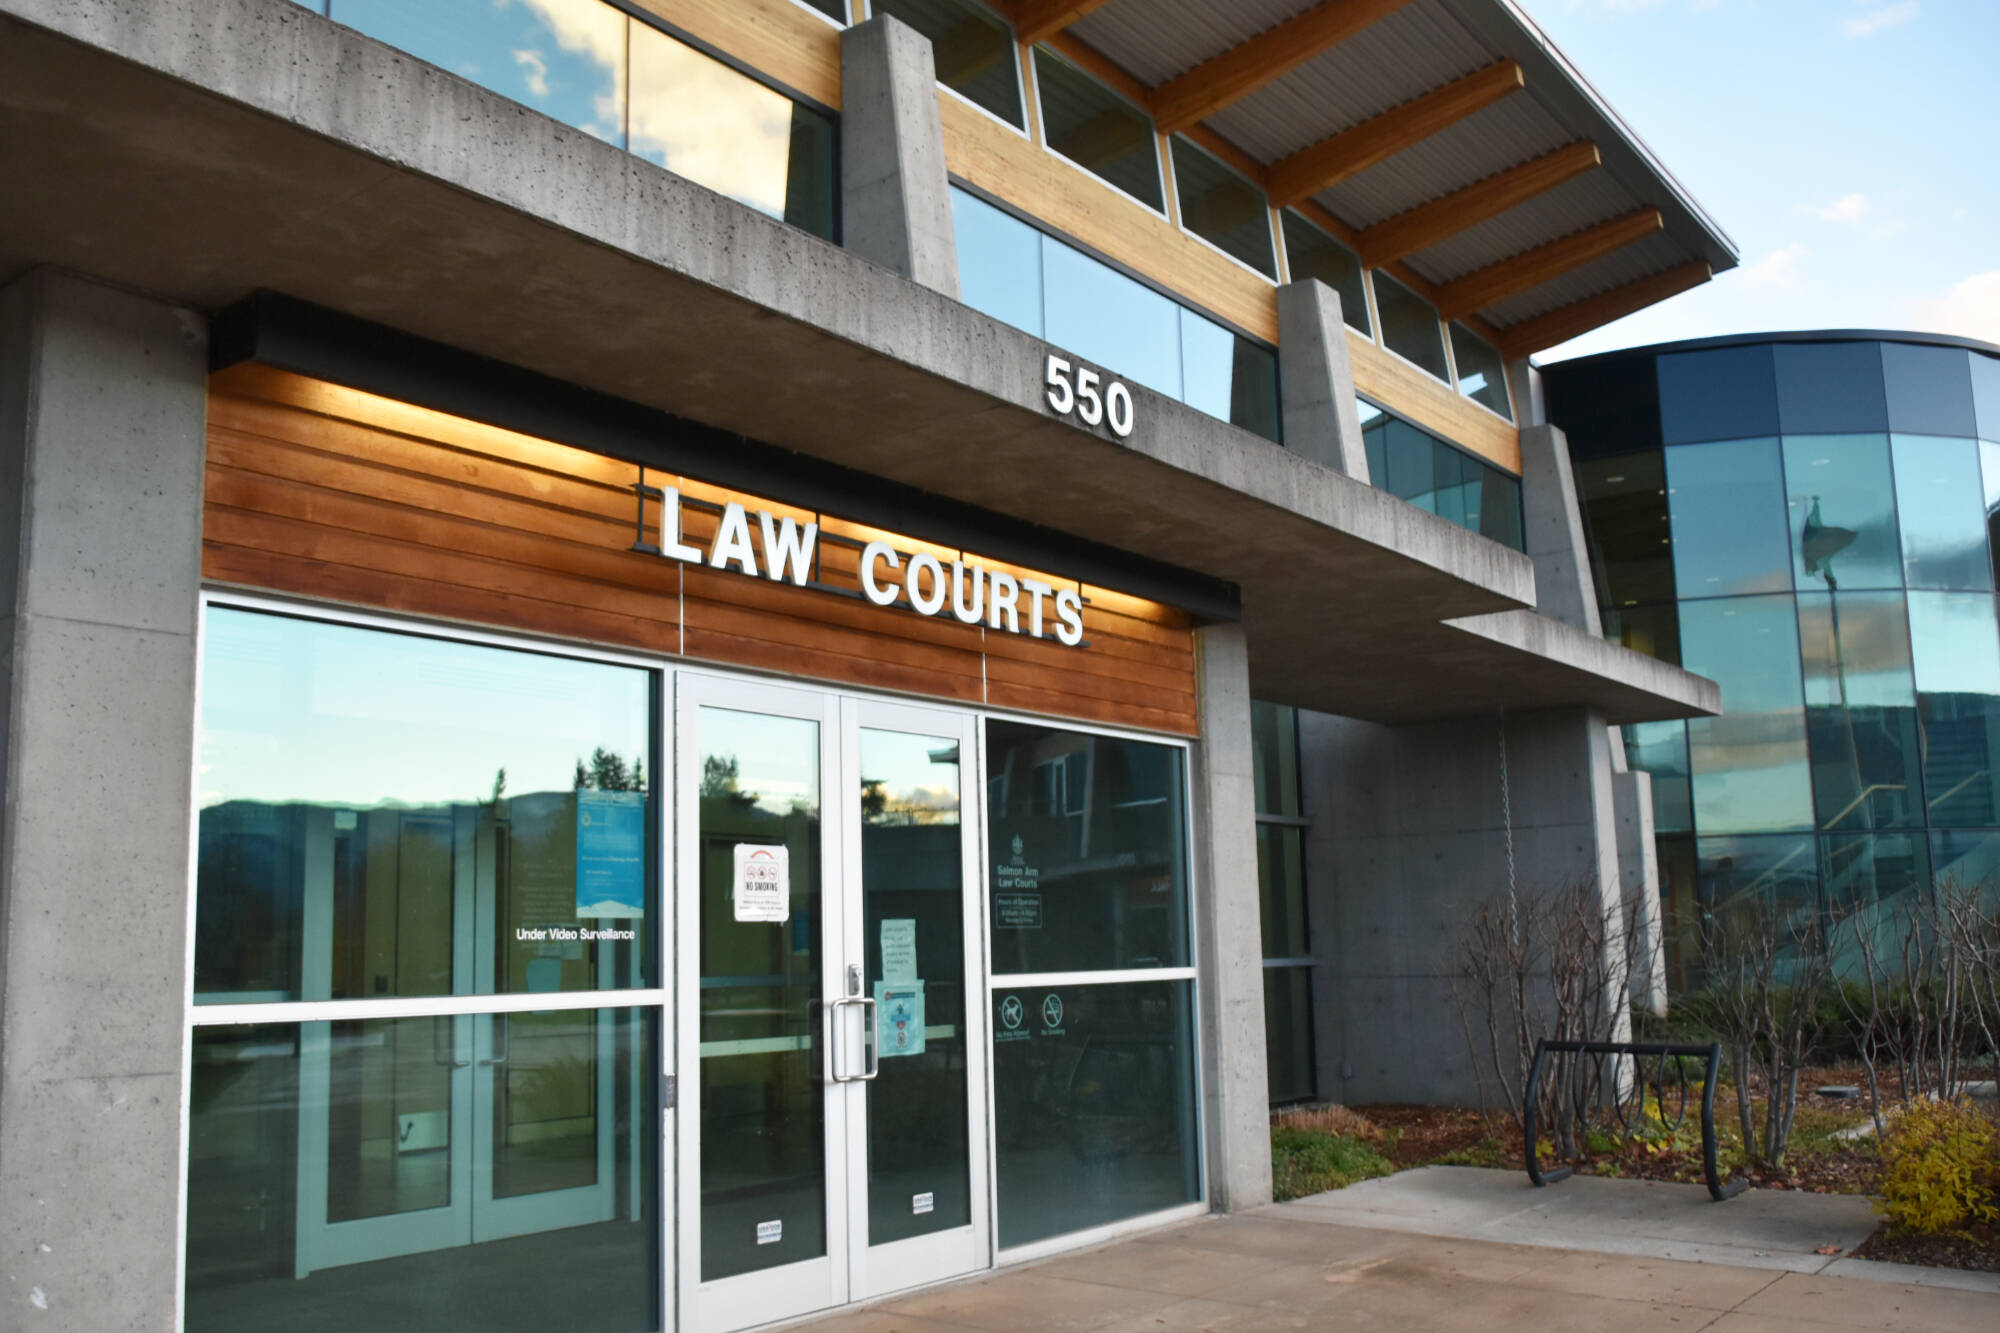 Adrienne Georgette Langen, 50, was given a conditional sentence March 21, 2022 in Salmon Arm on three drug charges, one of them possession of methamphetamine for the purpose of trafficking, stemming from December 2019 in Sicamous. (File photo)